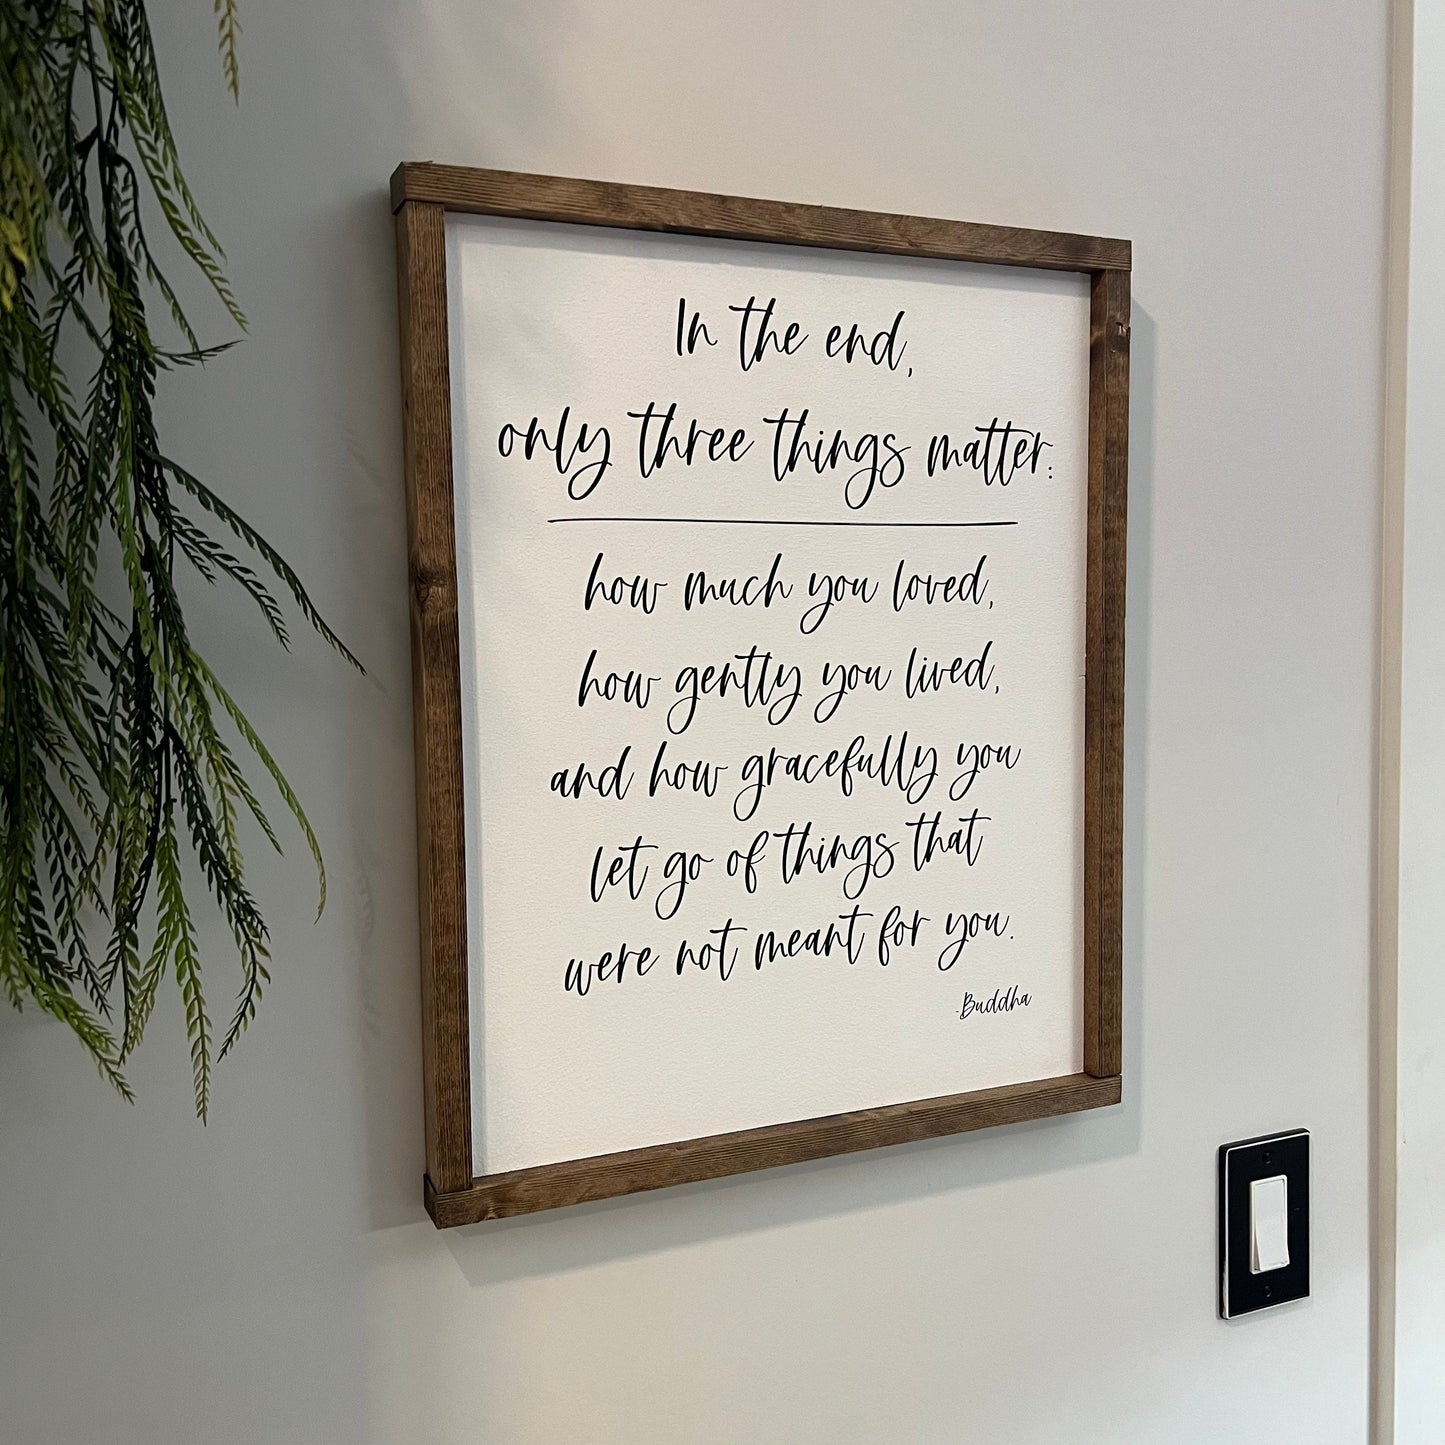 in the end, only three things matter wood sign [FREE SHIPPING]